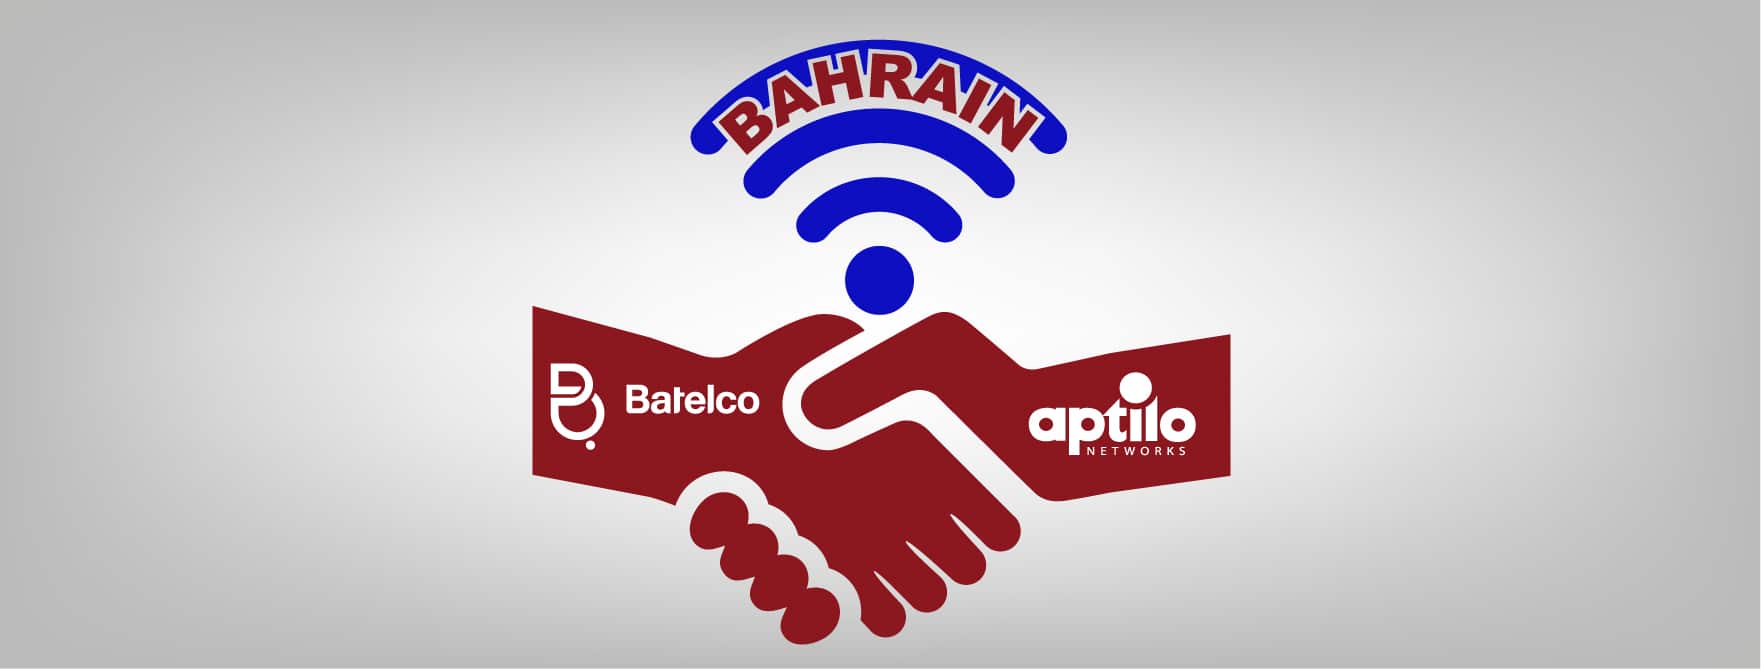 Batelco and Aptilo Networks Partner for First-Class Wi-Fi Services in Bahrain